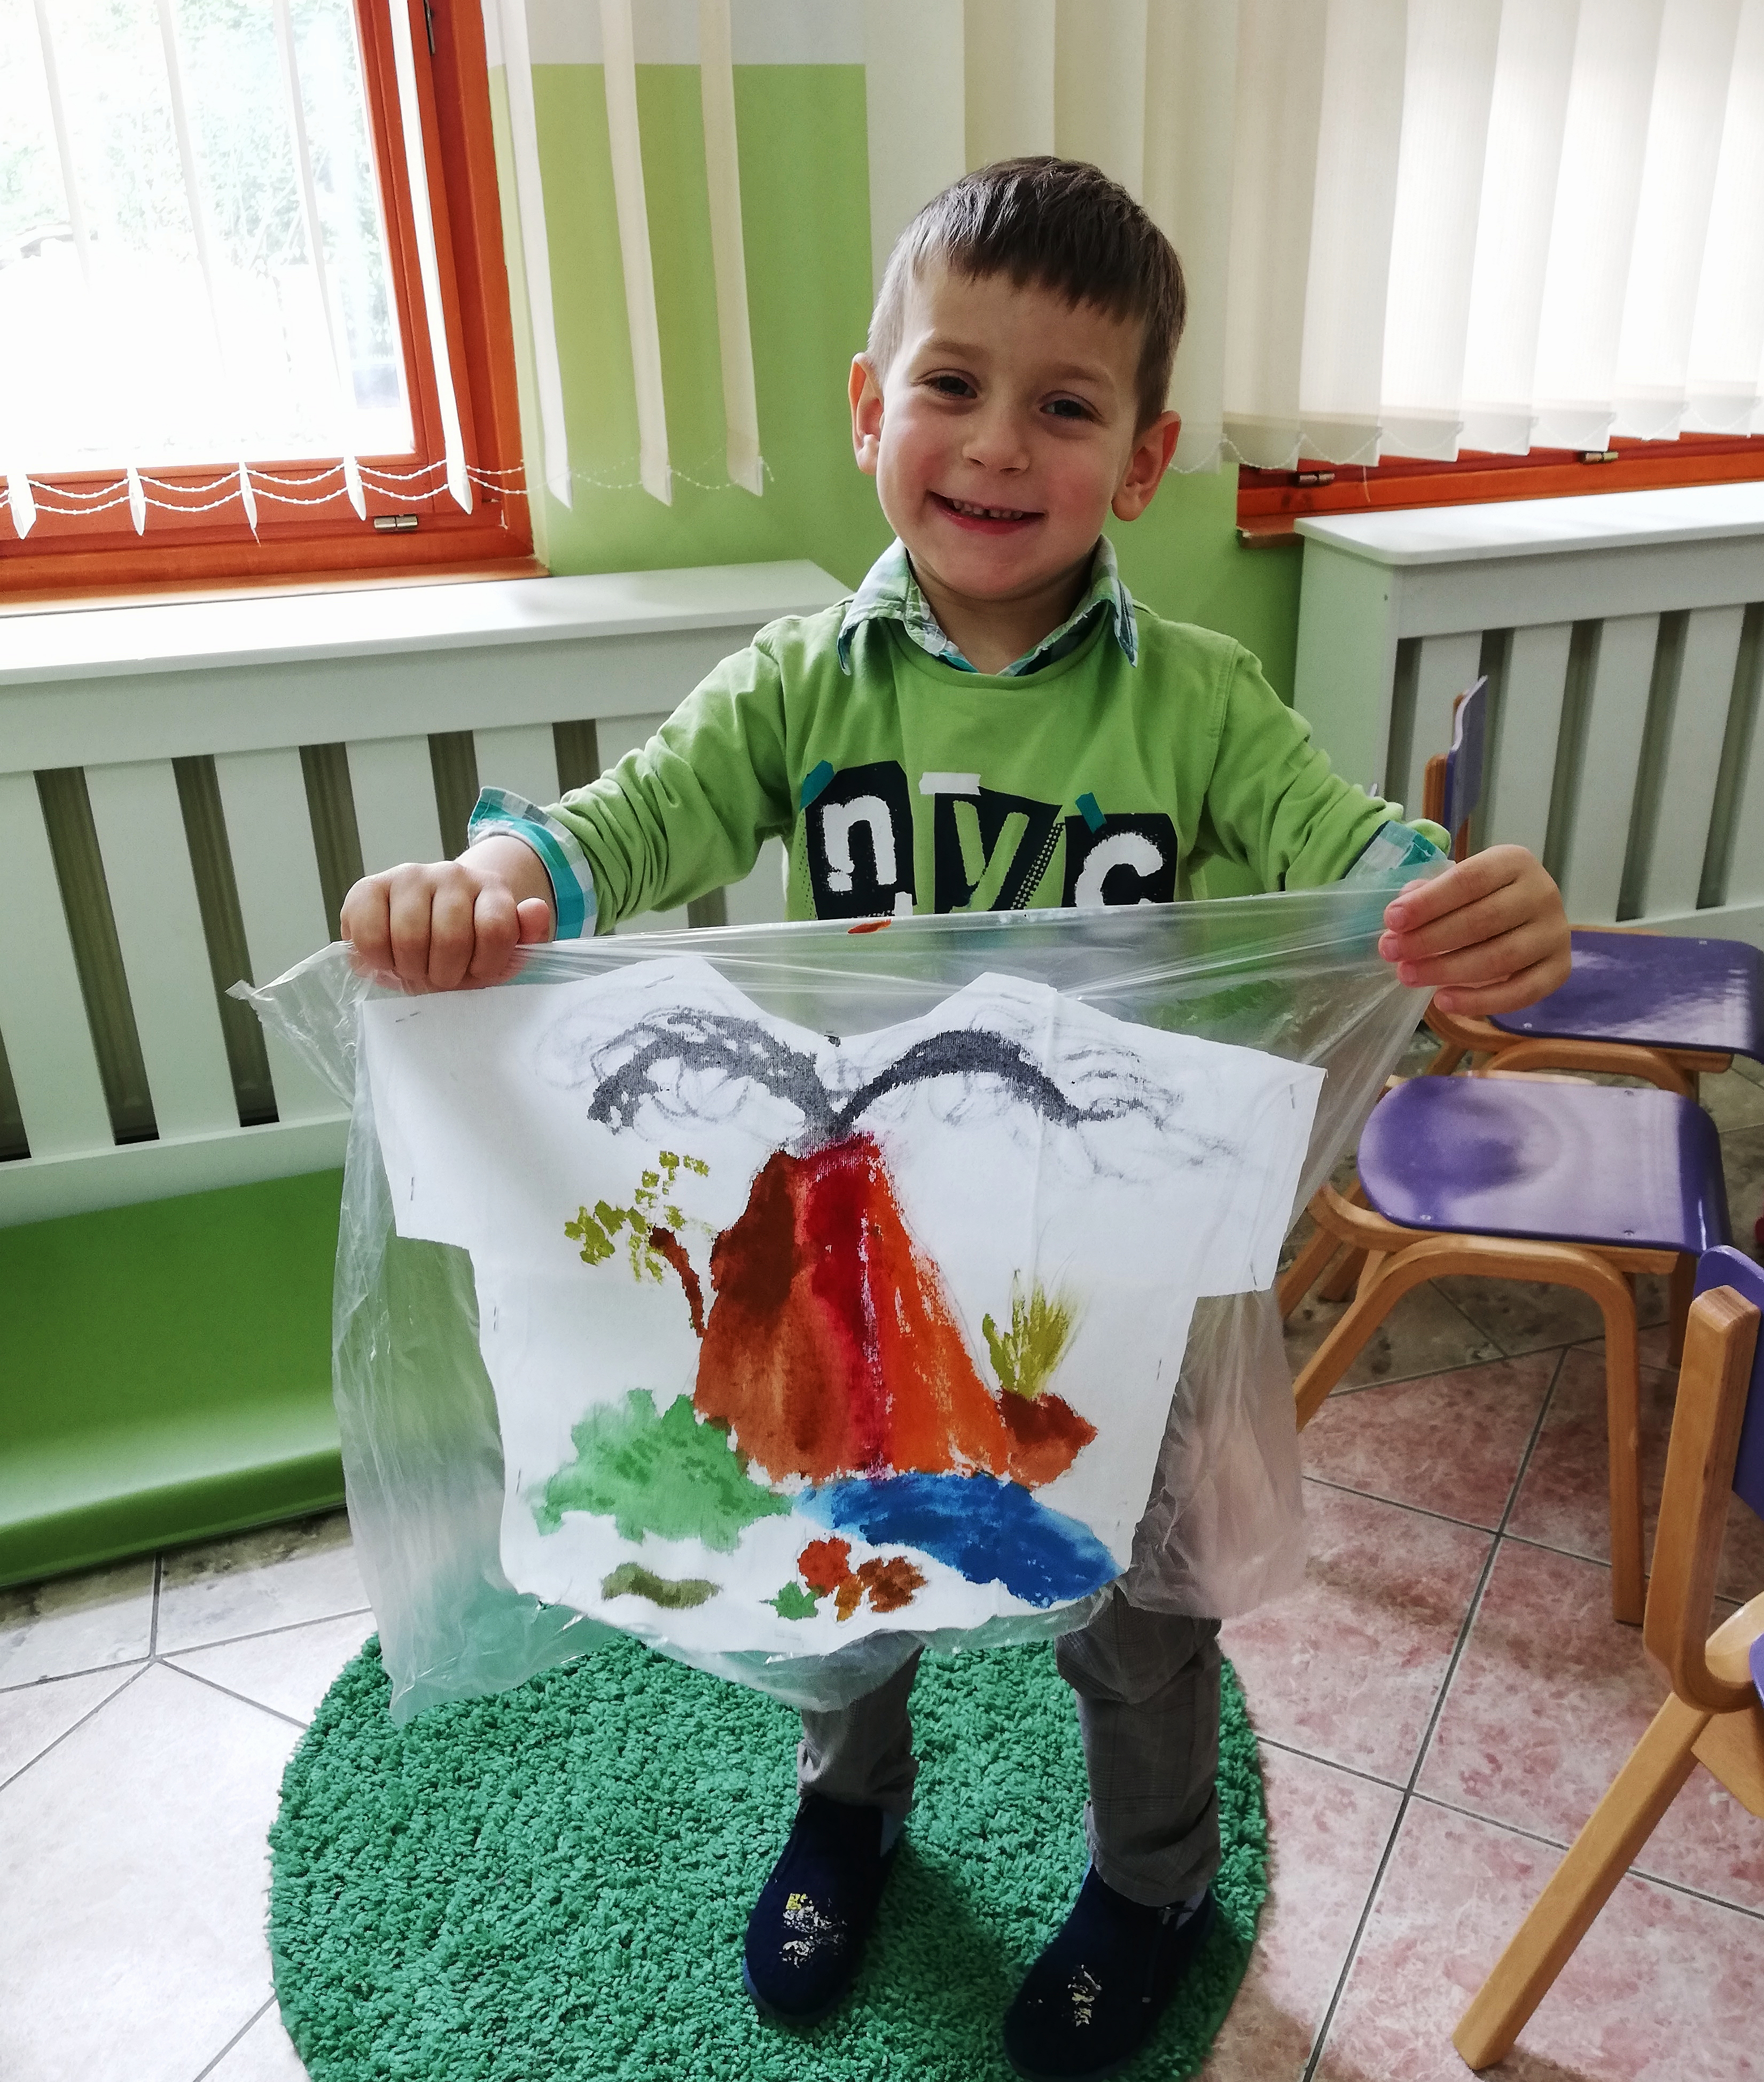 Lazar, who will soon turn 6, overcame all his communication difficulties. He proudly showed us his art project - a t-shirt with a volcano painted over it.